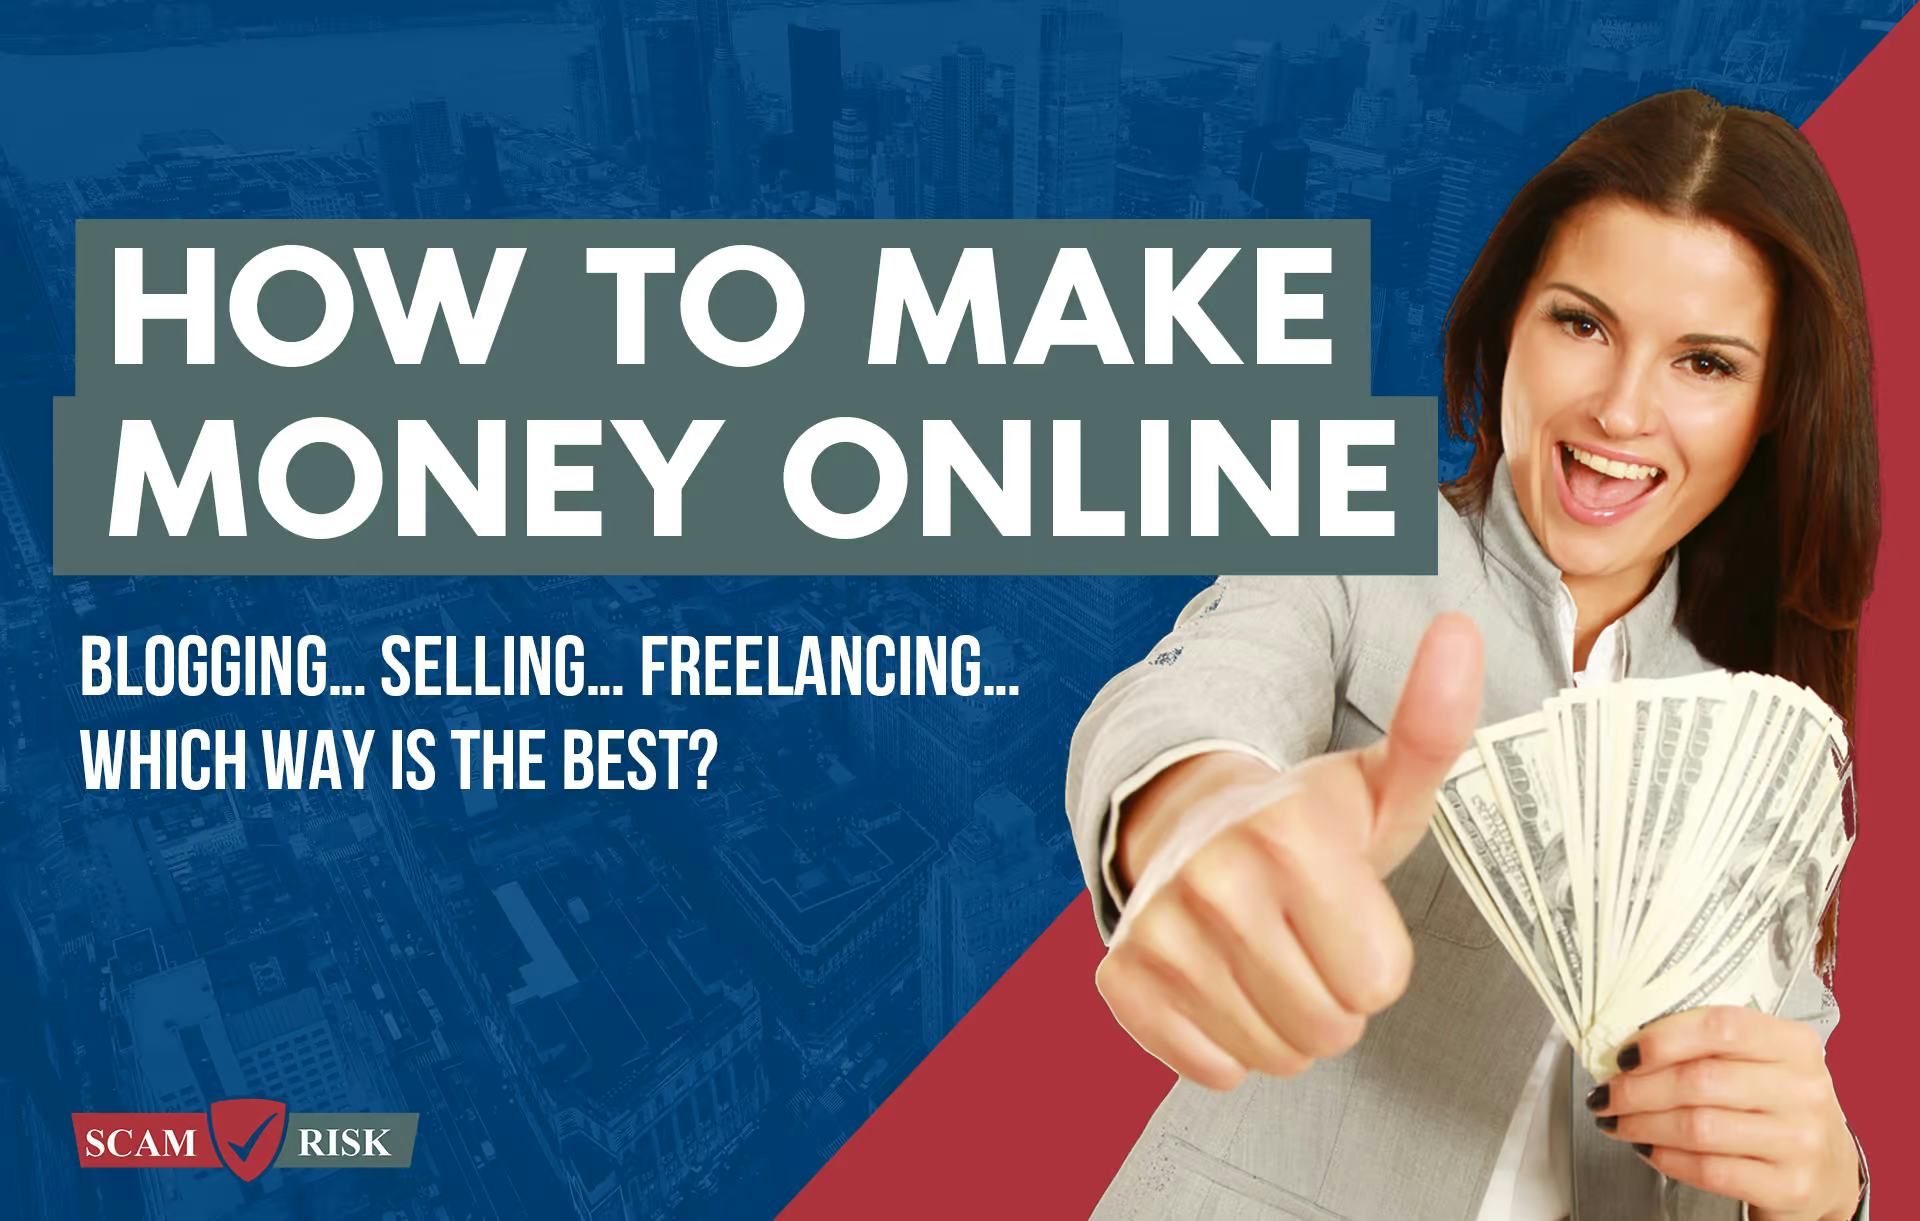 How To Make Money Online In [year] (Top 10): Blogging... Selling... Freelancing... Which Way Is The Best?